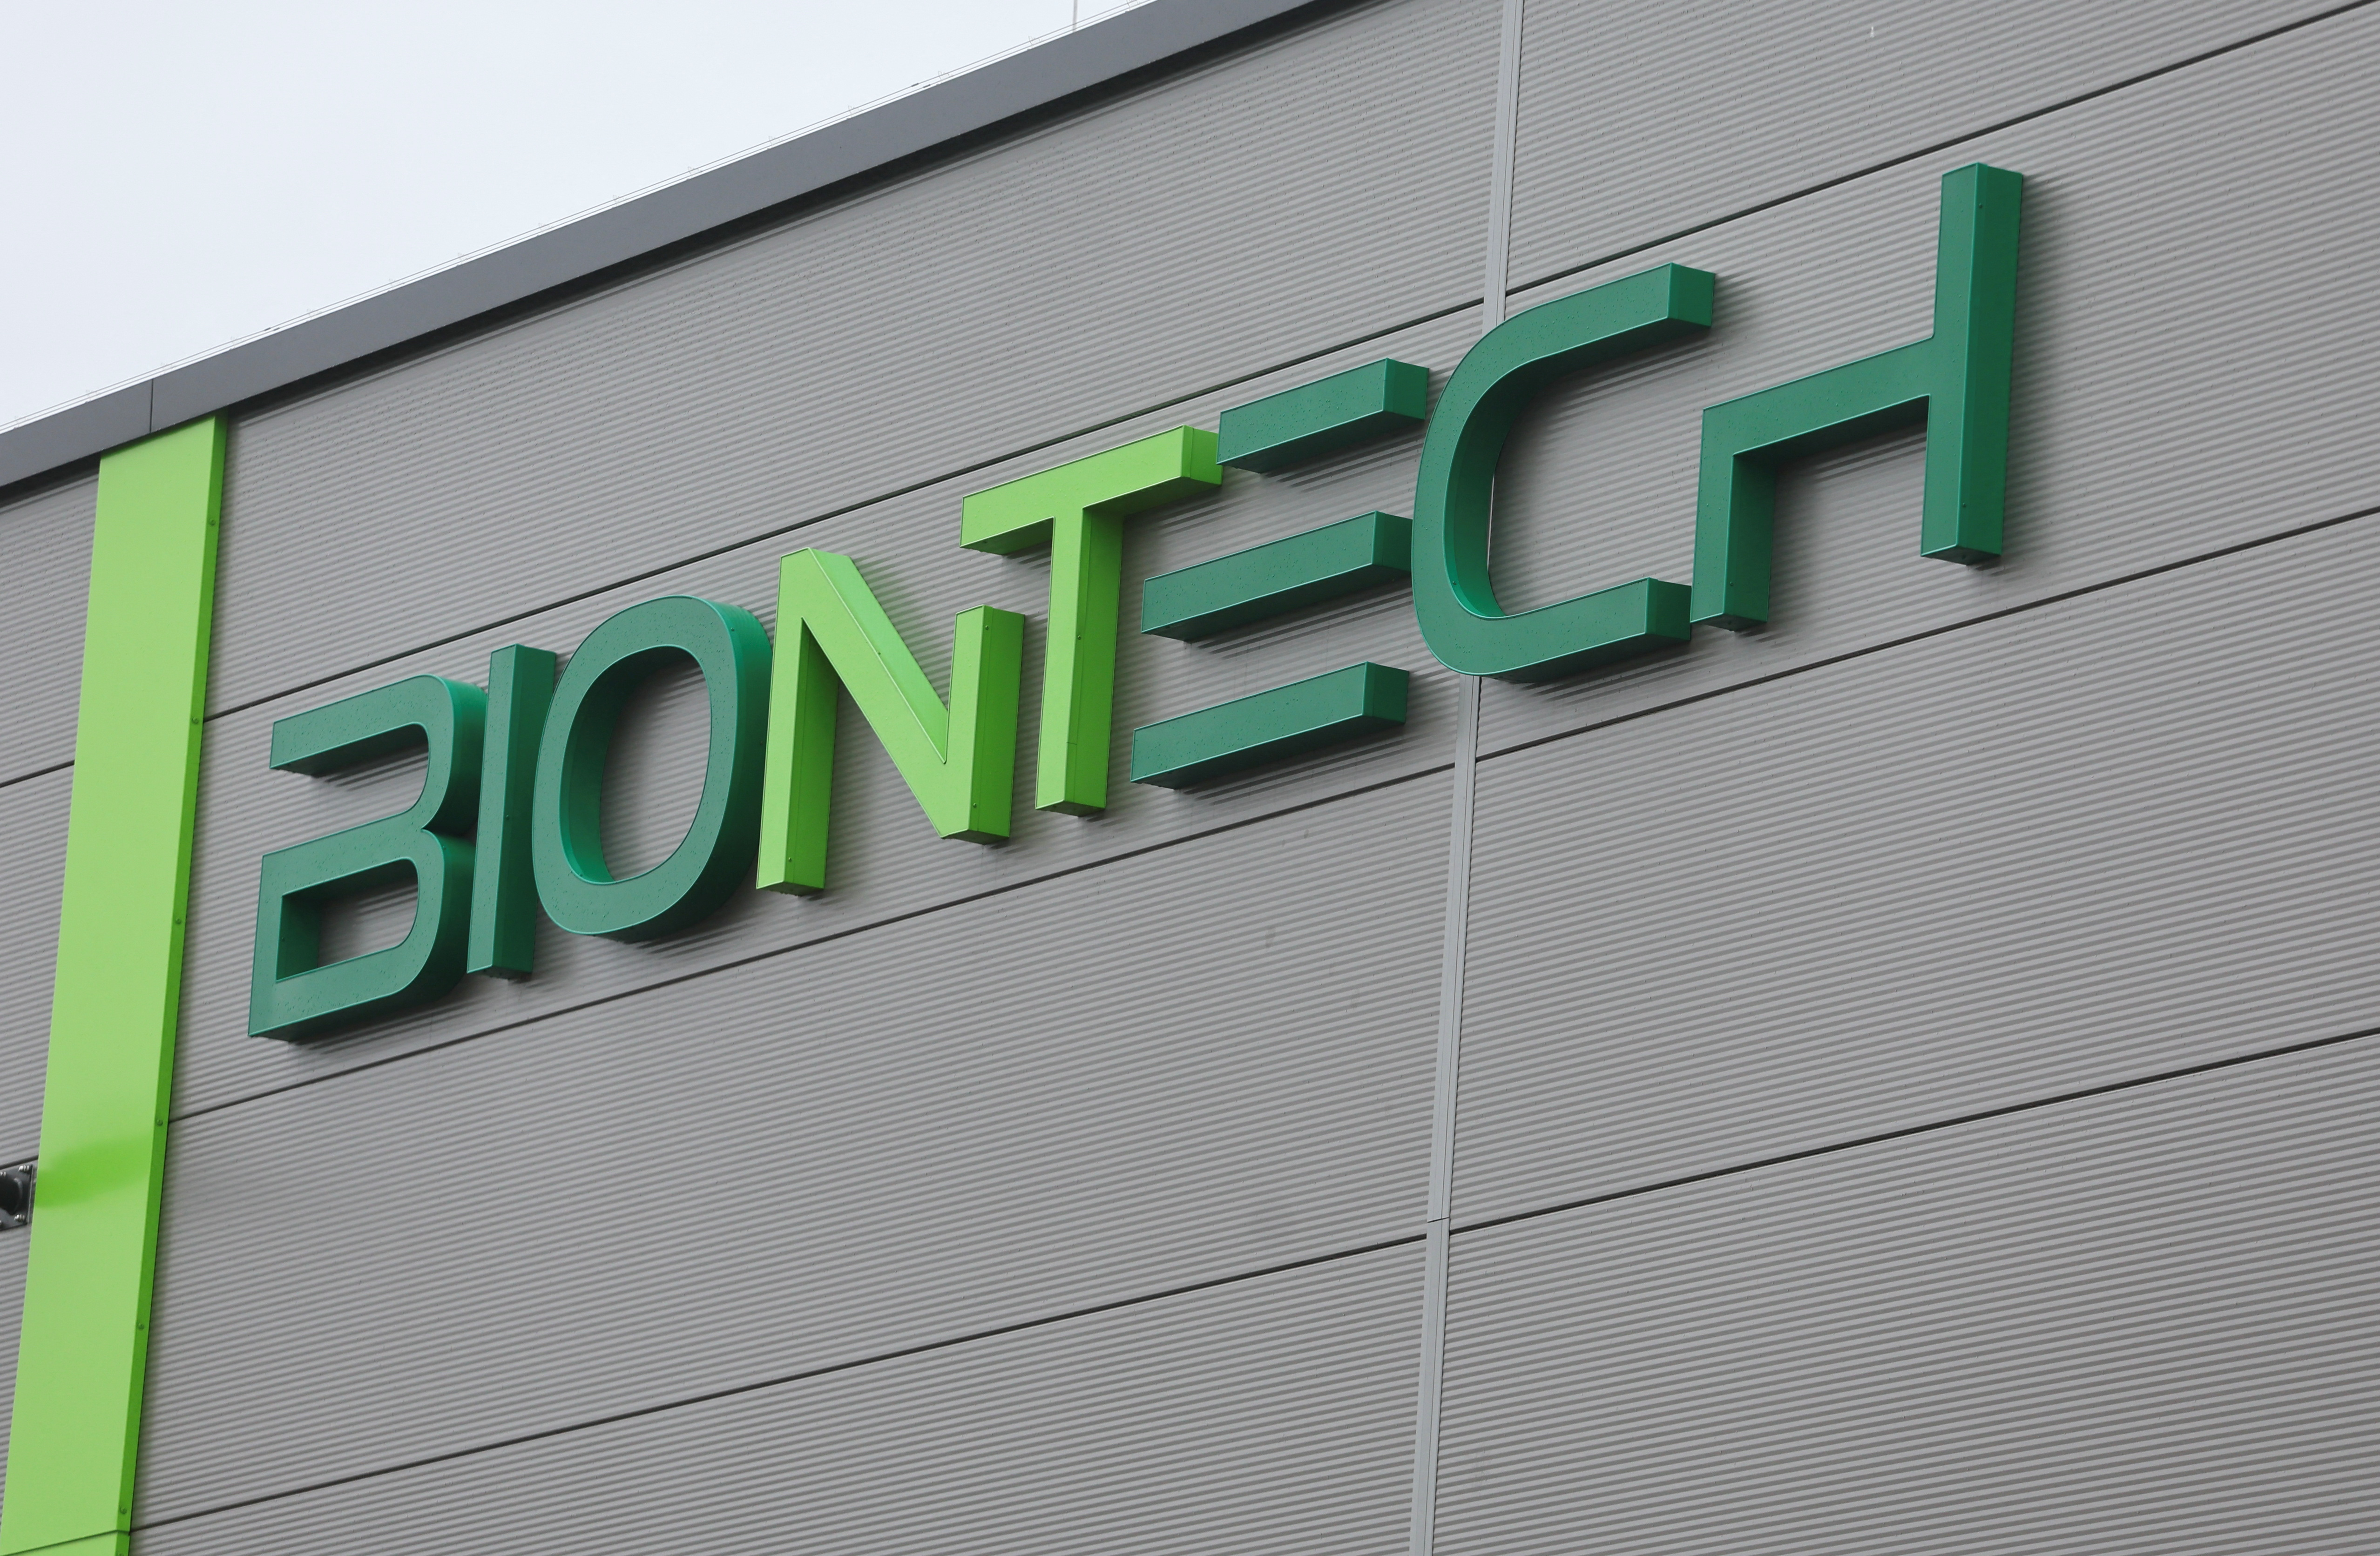 Research laboratory of BioNTech in Mainz